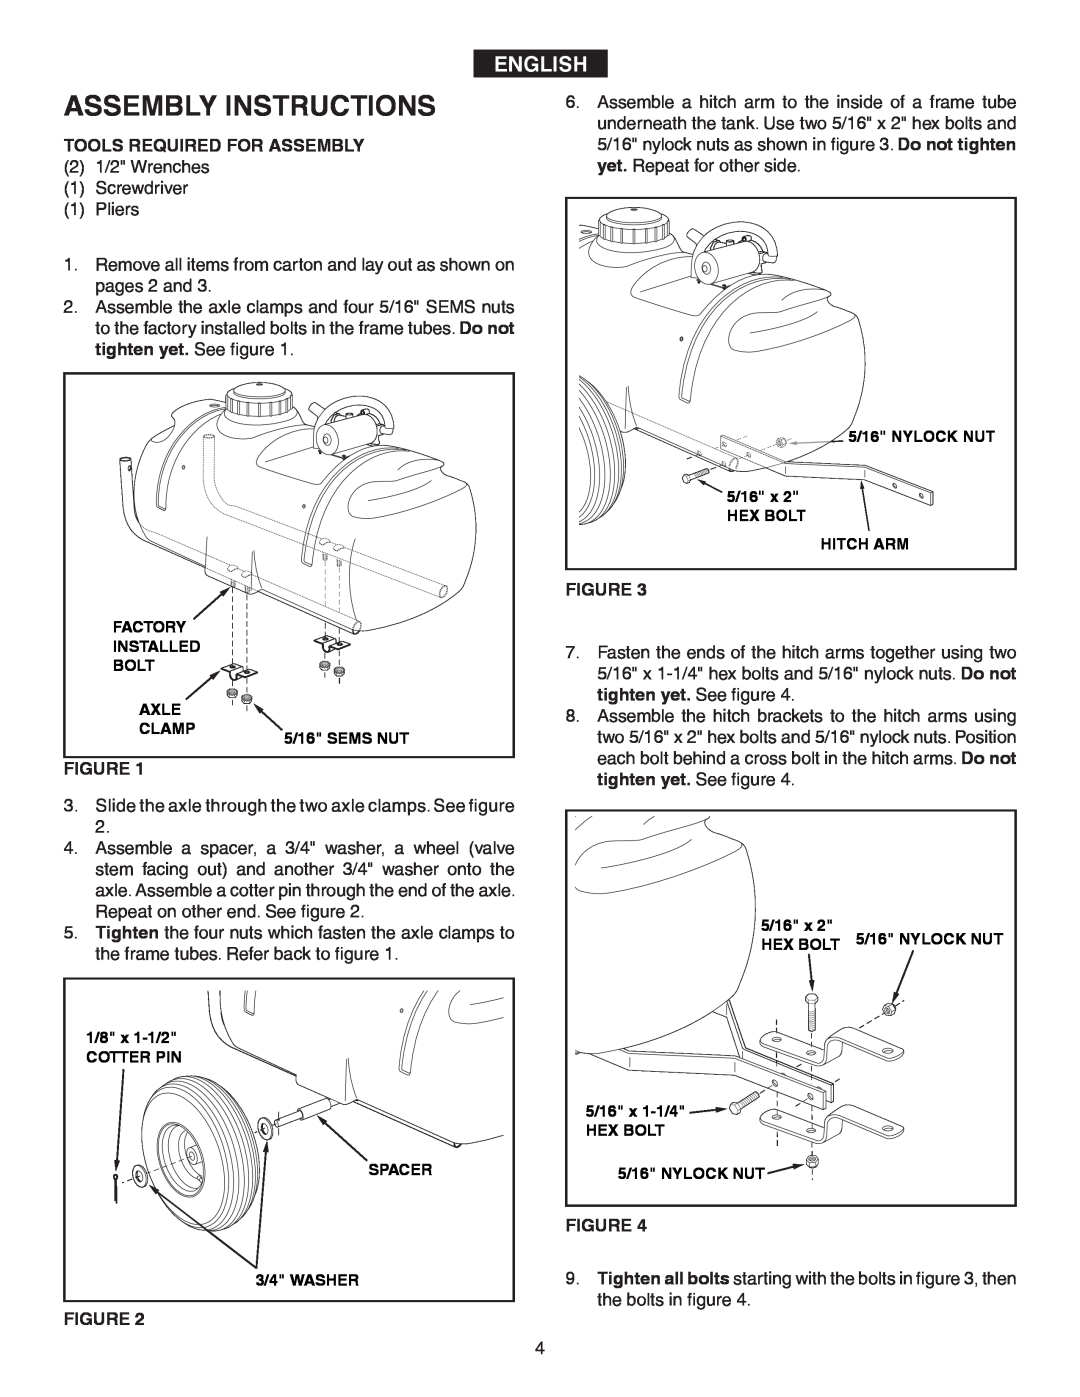 Agri-Fab 45-02932 owner manual Assembly Instructions, English, Tools Required For Assembly, Figure 